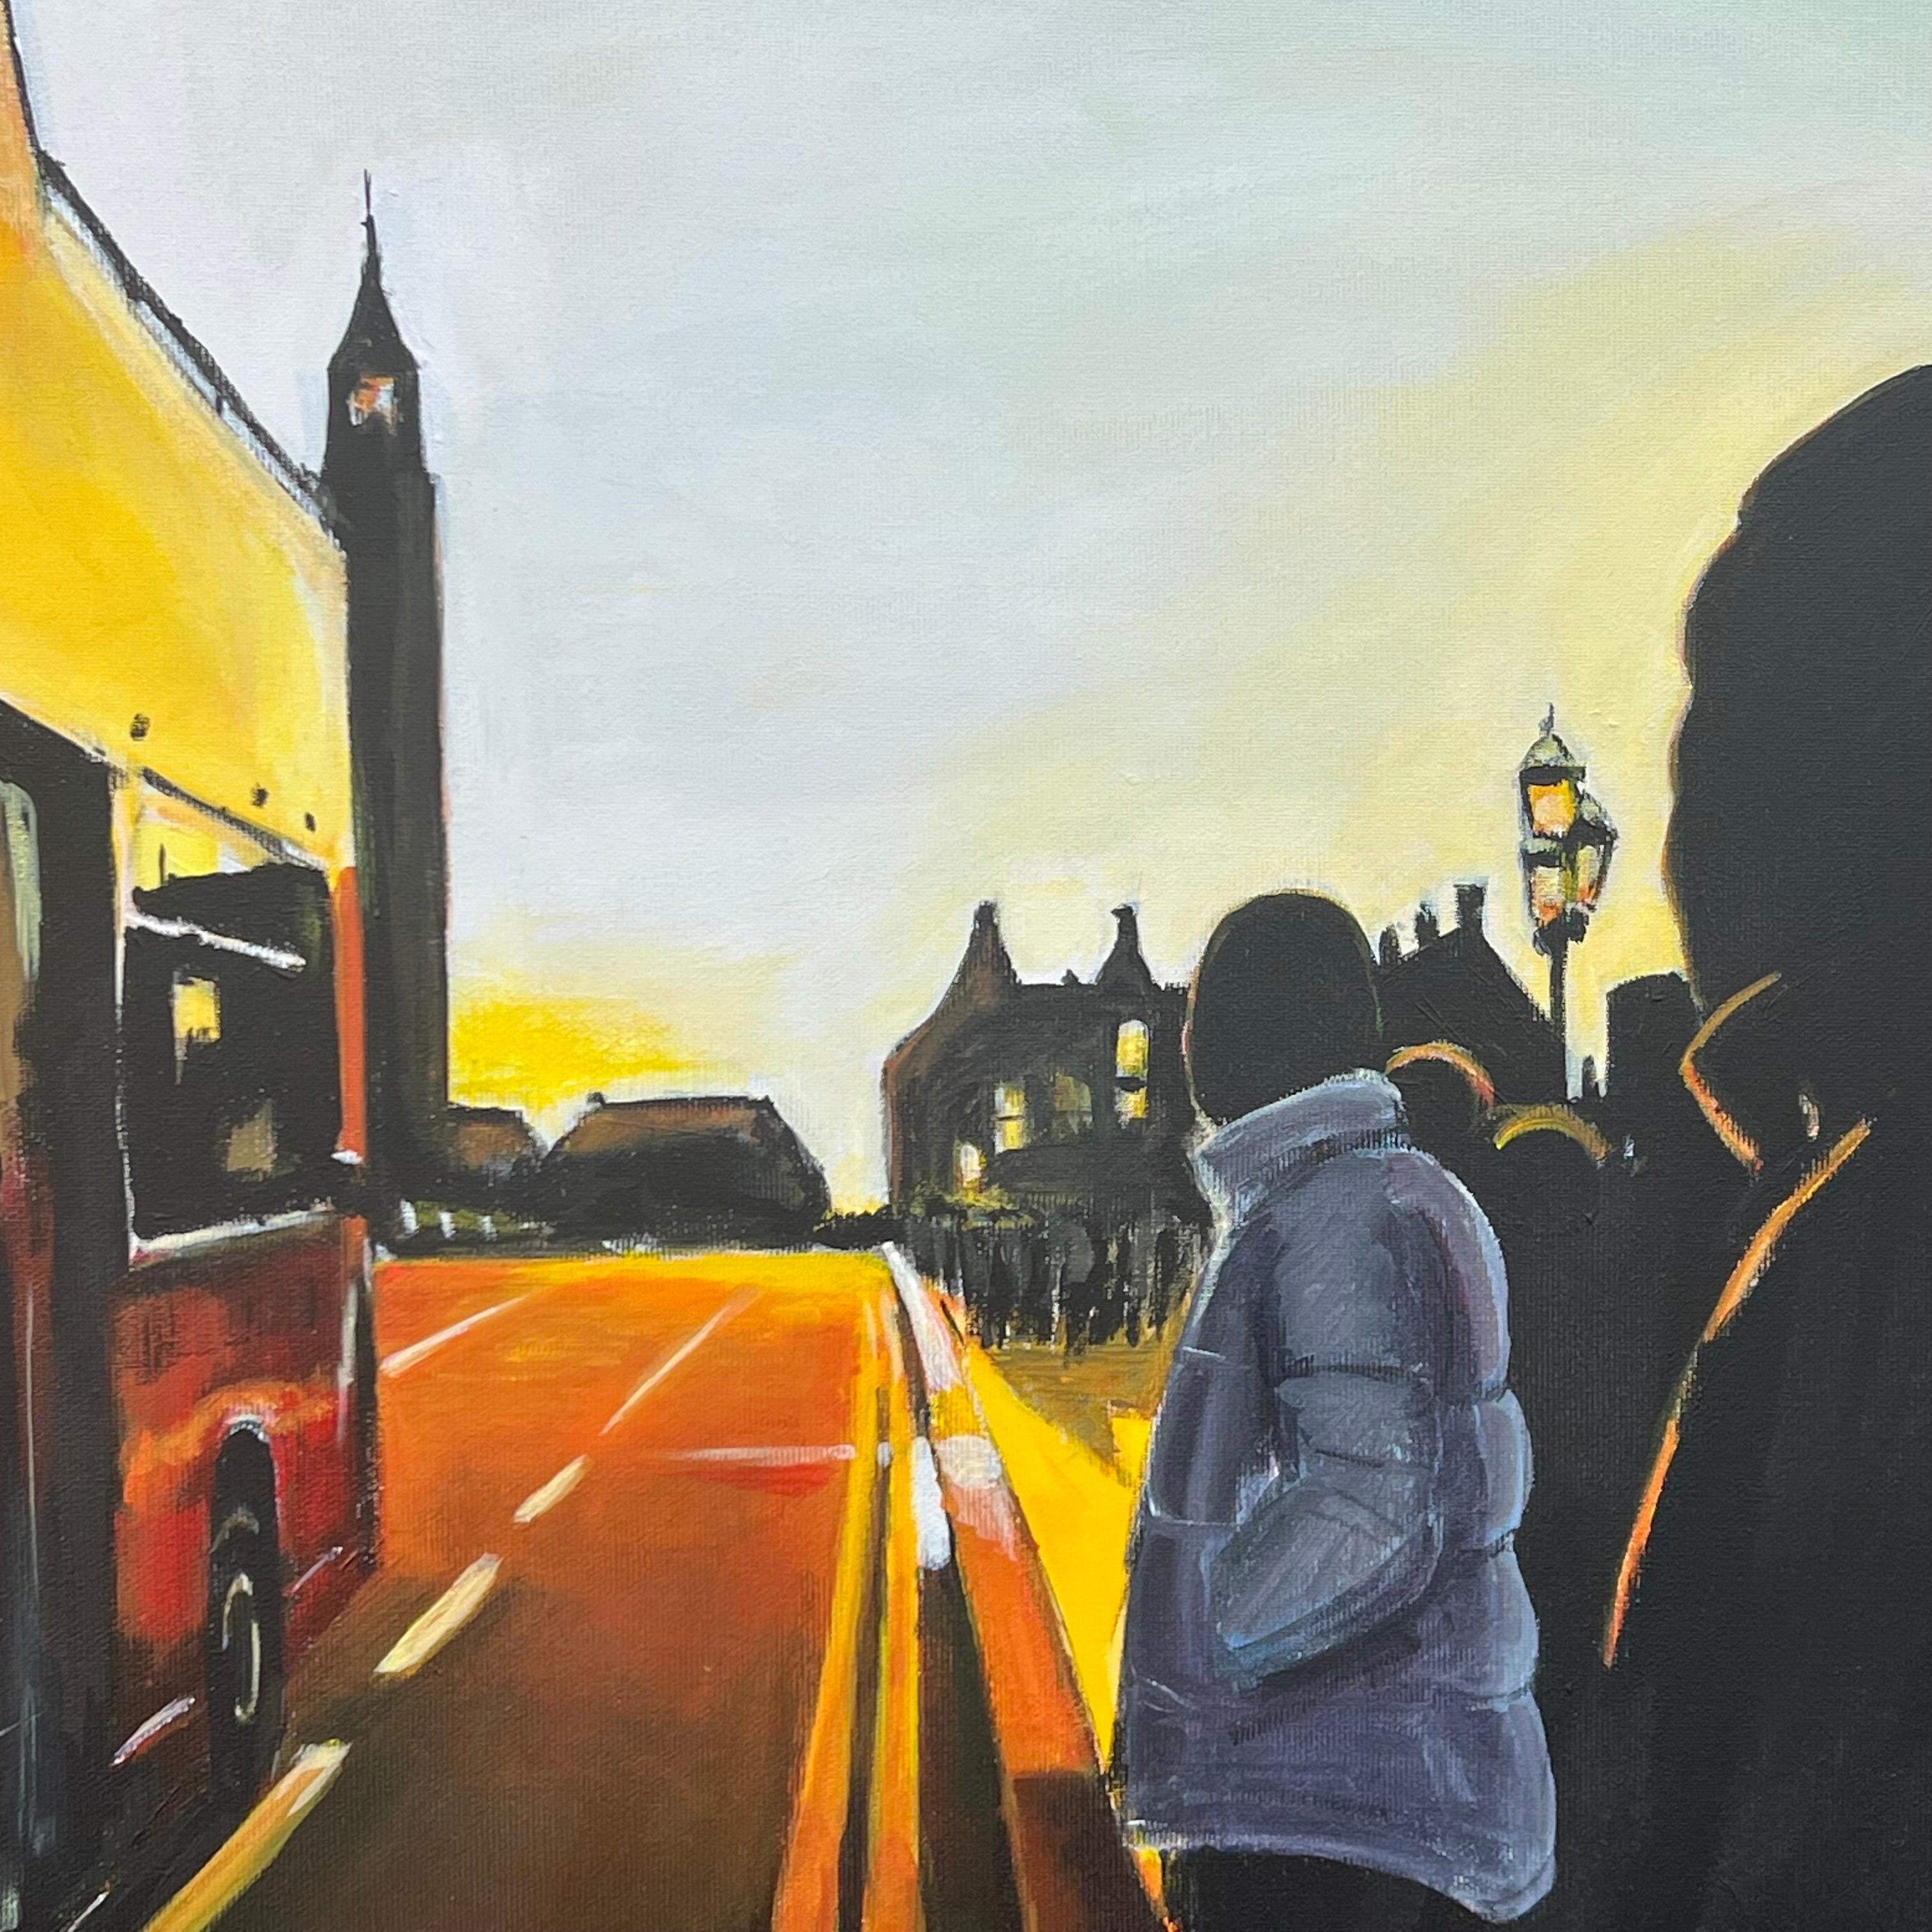 Westminster Sunset in London with Open Top Bus by British Urban Landscape Artist - Contemporary Painting by Angela Wakefield